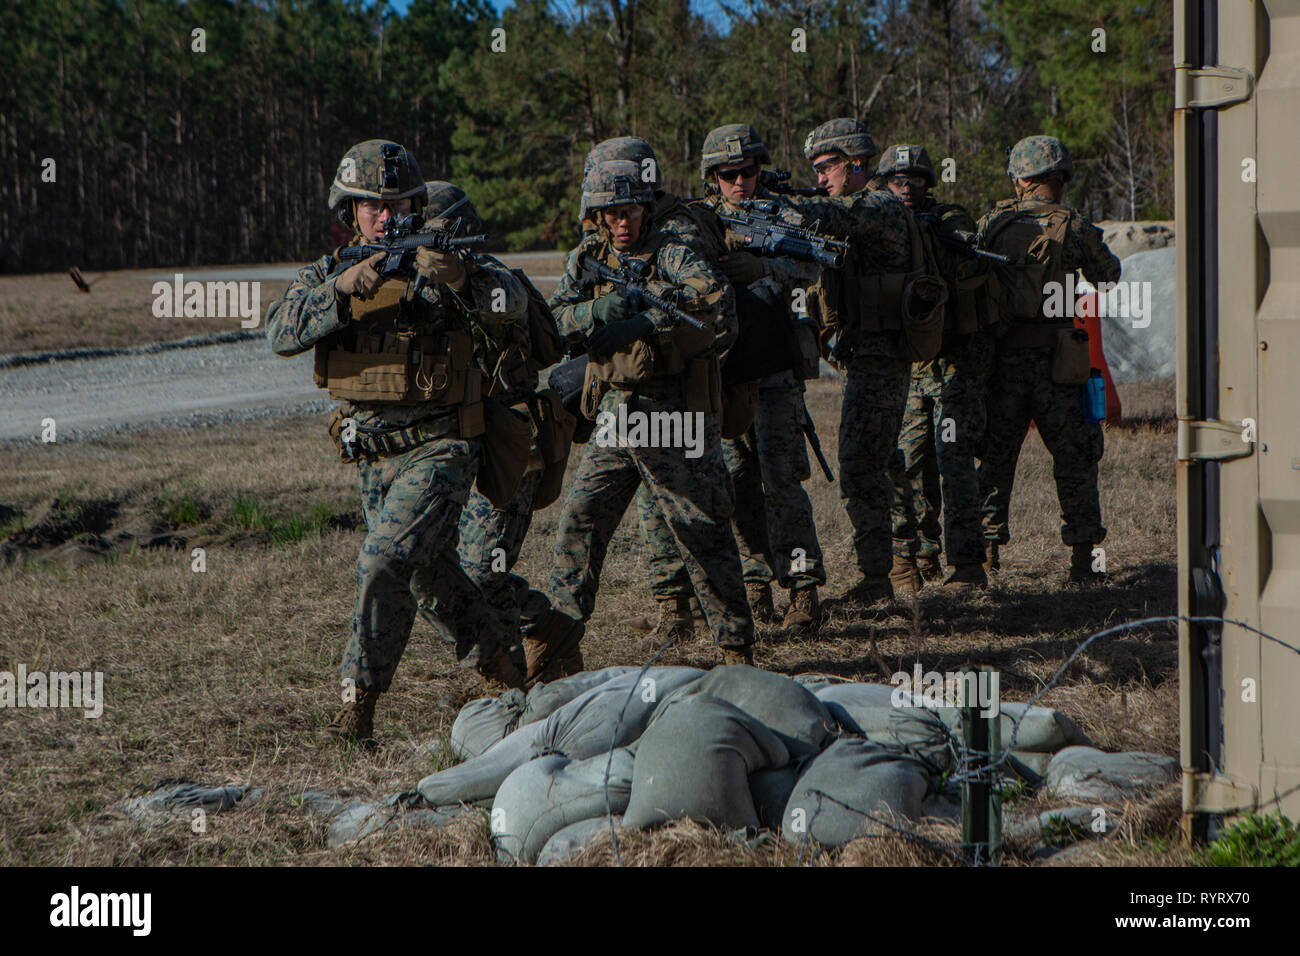 U.S. Marines with 2nd Combat Engineer Battalion, 2nd Marine Division, stack behind a barrior while conducting urban demolition training during the annual SAPPER Squad Competition on Camp Lejeune, N.C., March 13, 2019. Marines from four squads compete against each other for a week to test their strengths within the occupational field and build comradery while maintaining mission readiness. (U.S. Marine Corps photo by Lance Cpl. Nathaniel Q. Hamilton) Stock Photo